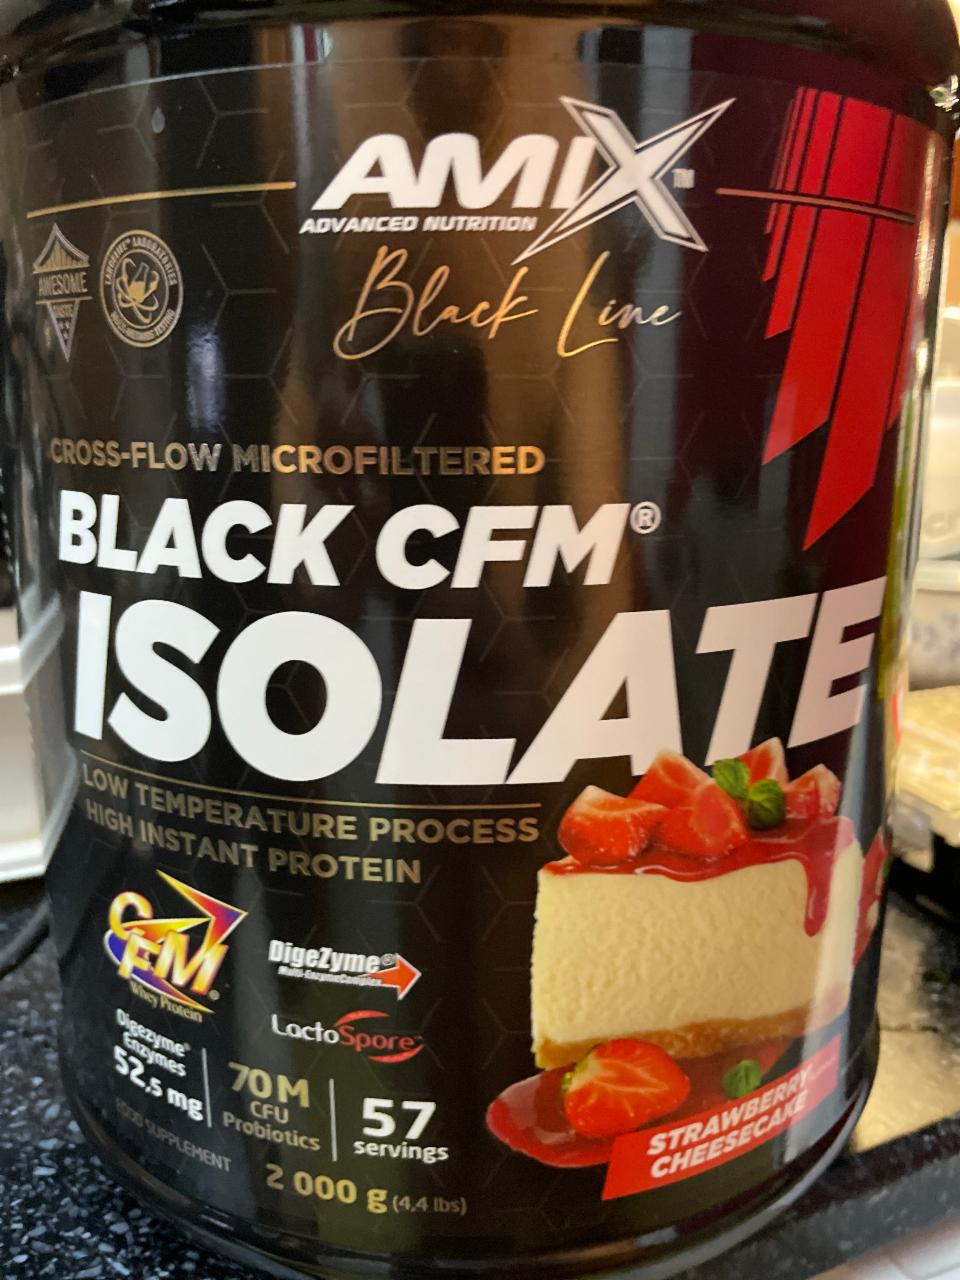 Fotografie - BLACK CFM ISOLATE high instant protein Strawberry cheesecake Amix Nutrition